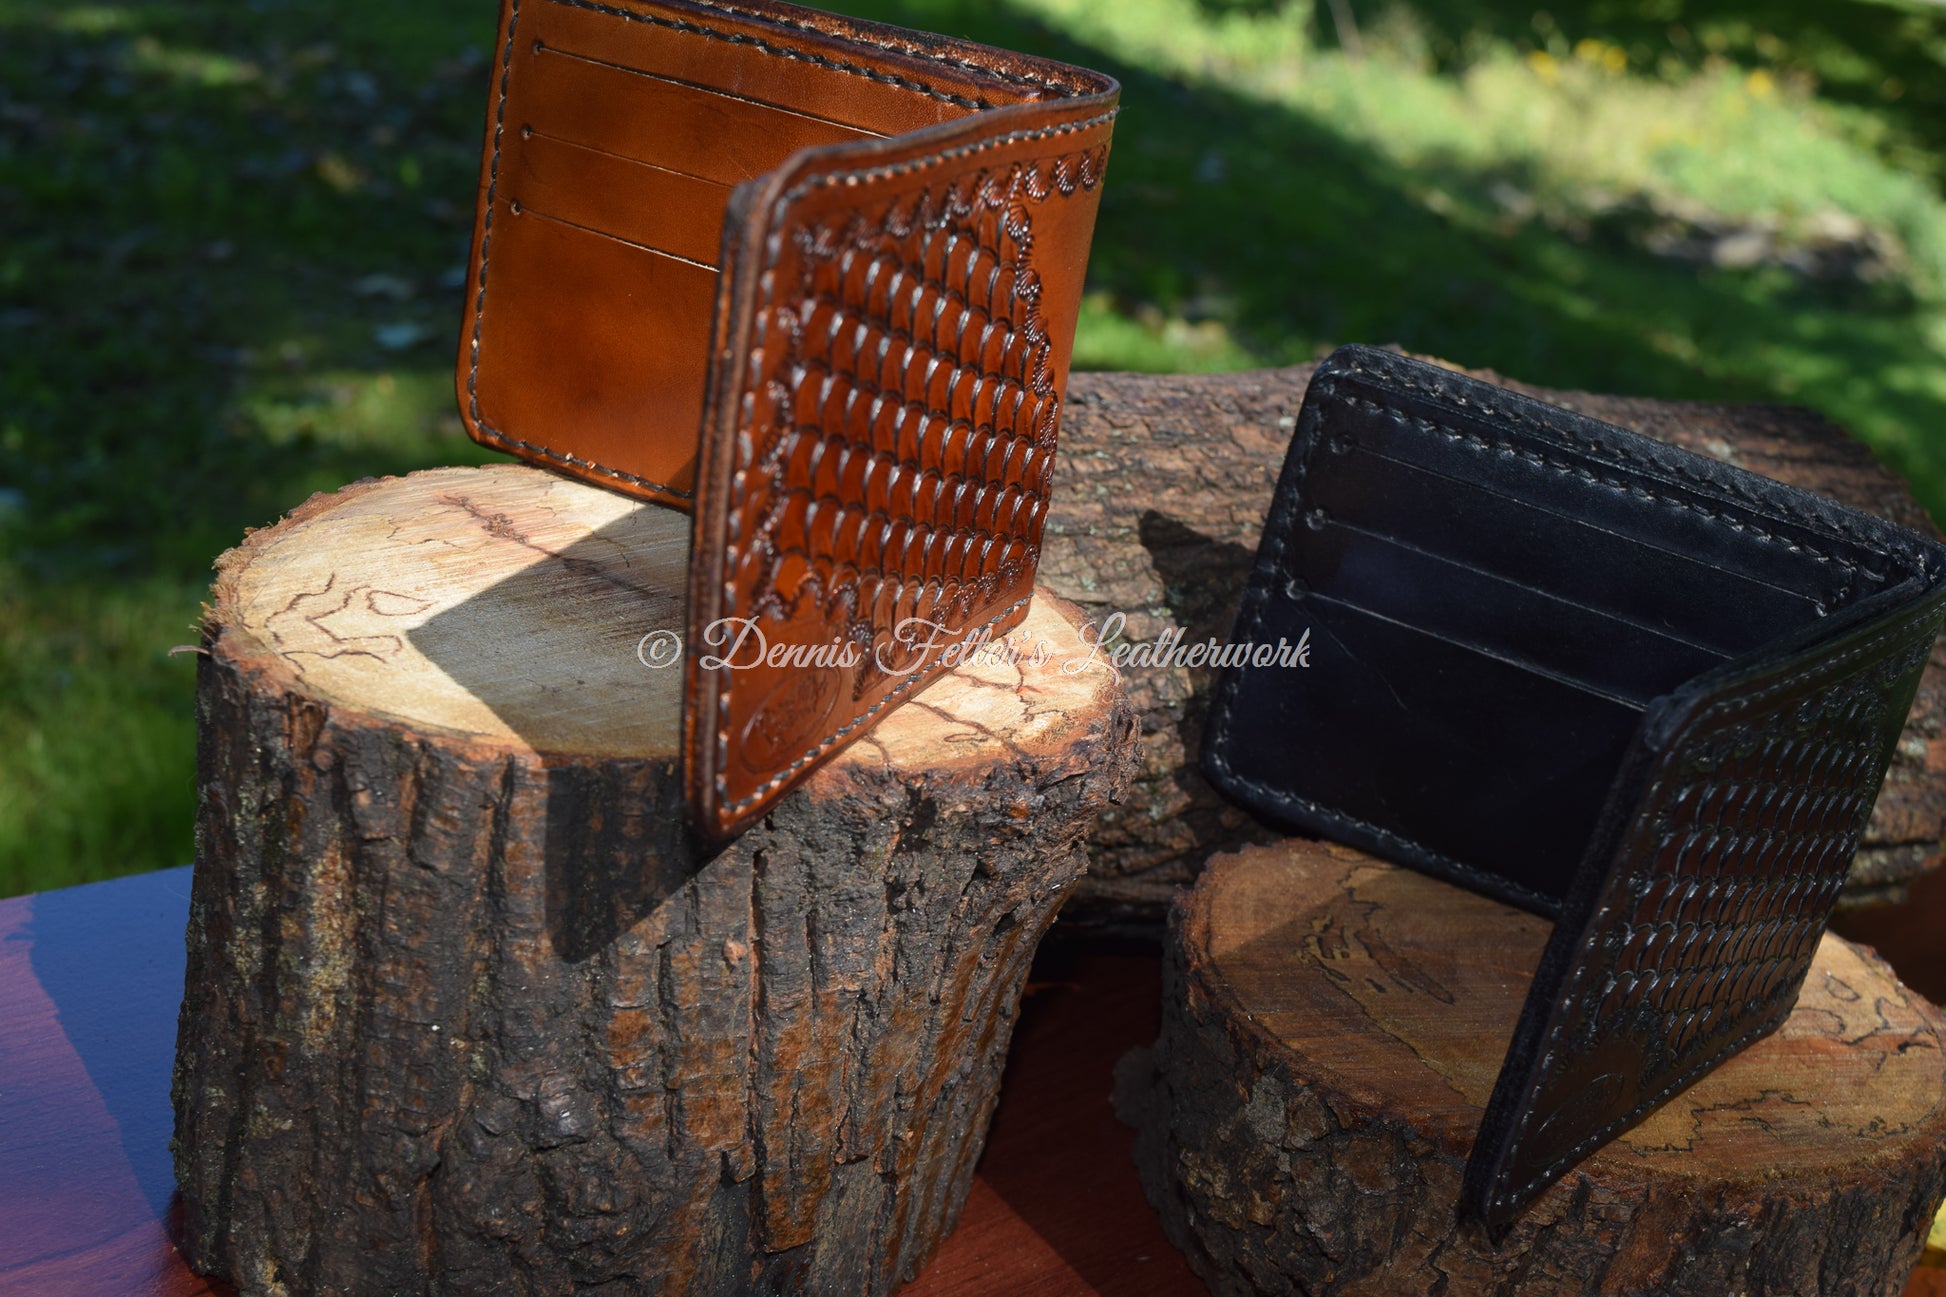 view of both black and brown leather wallet showing inner pockets and exterior stamping